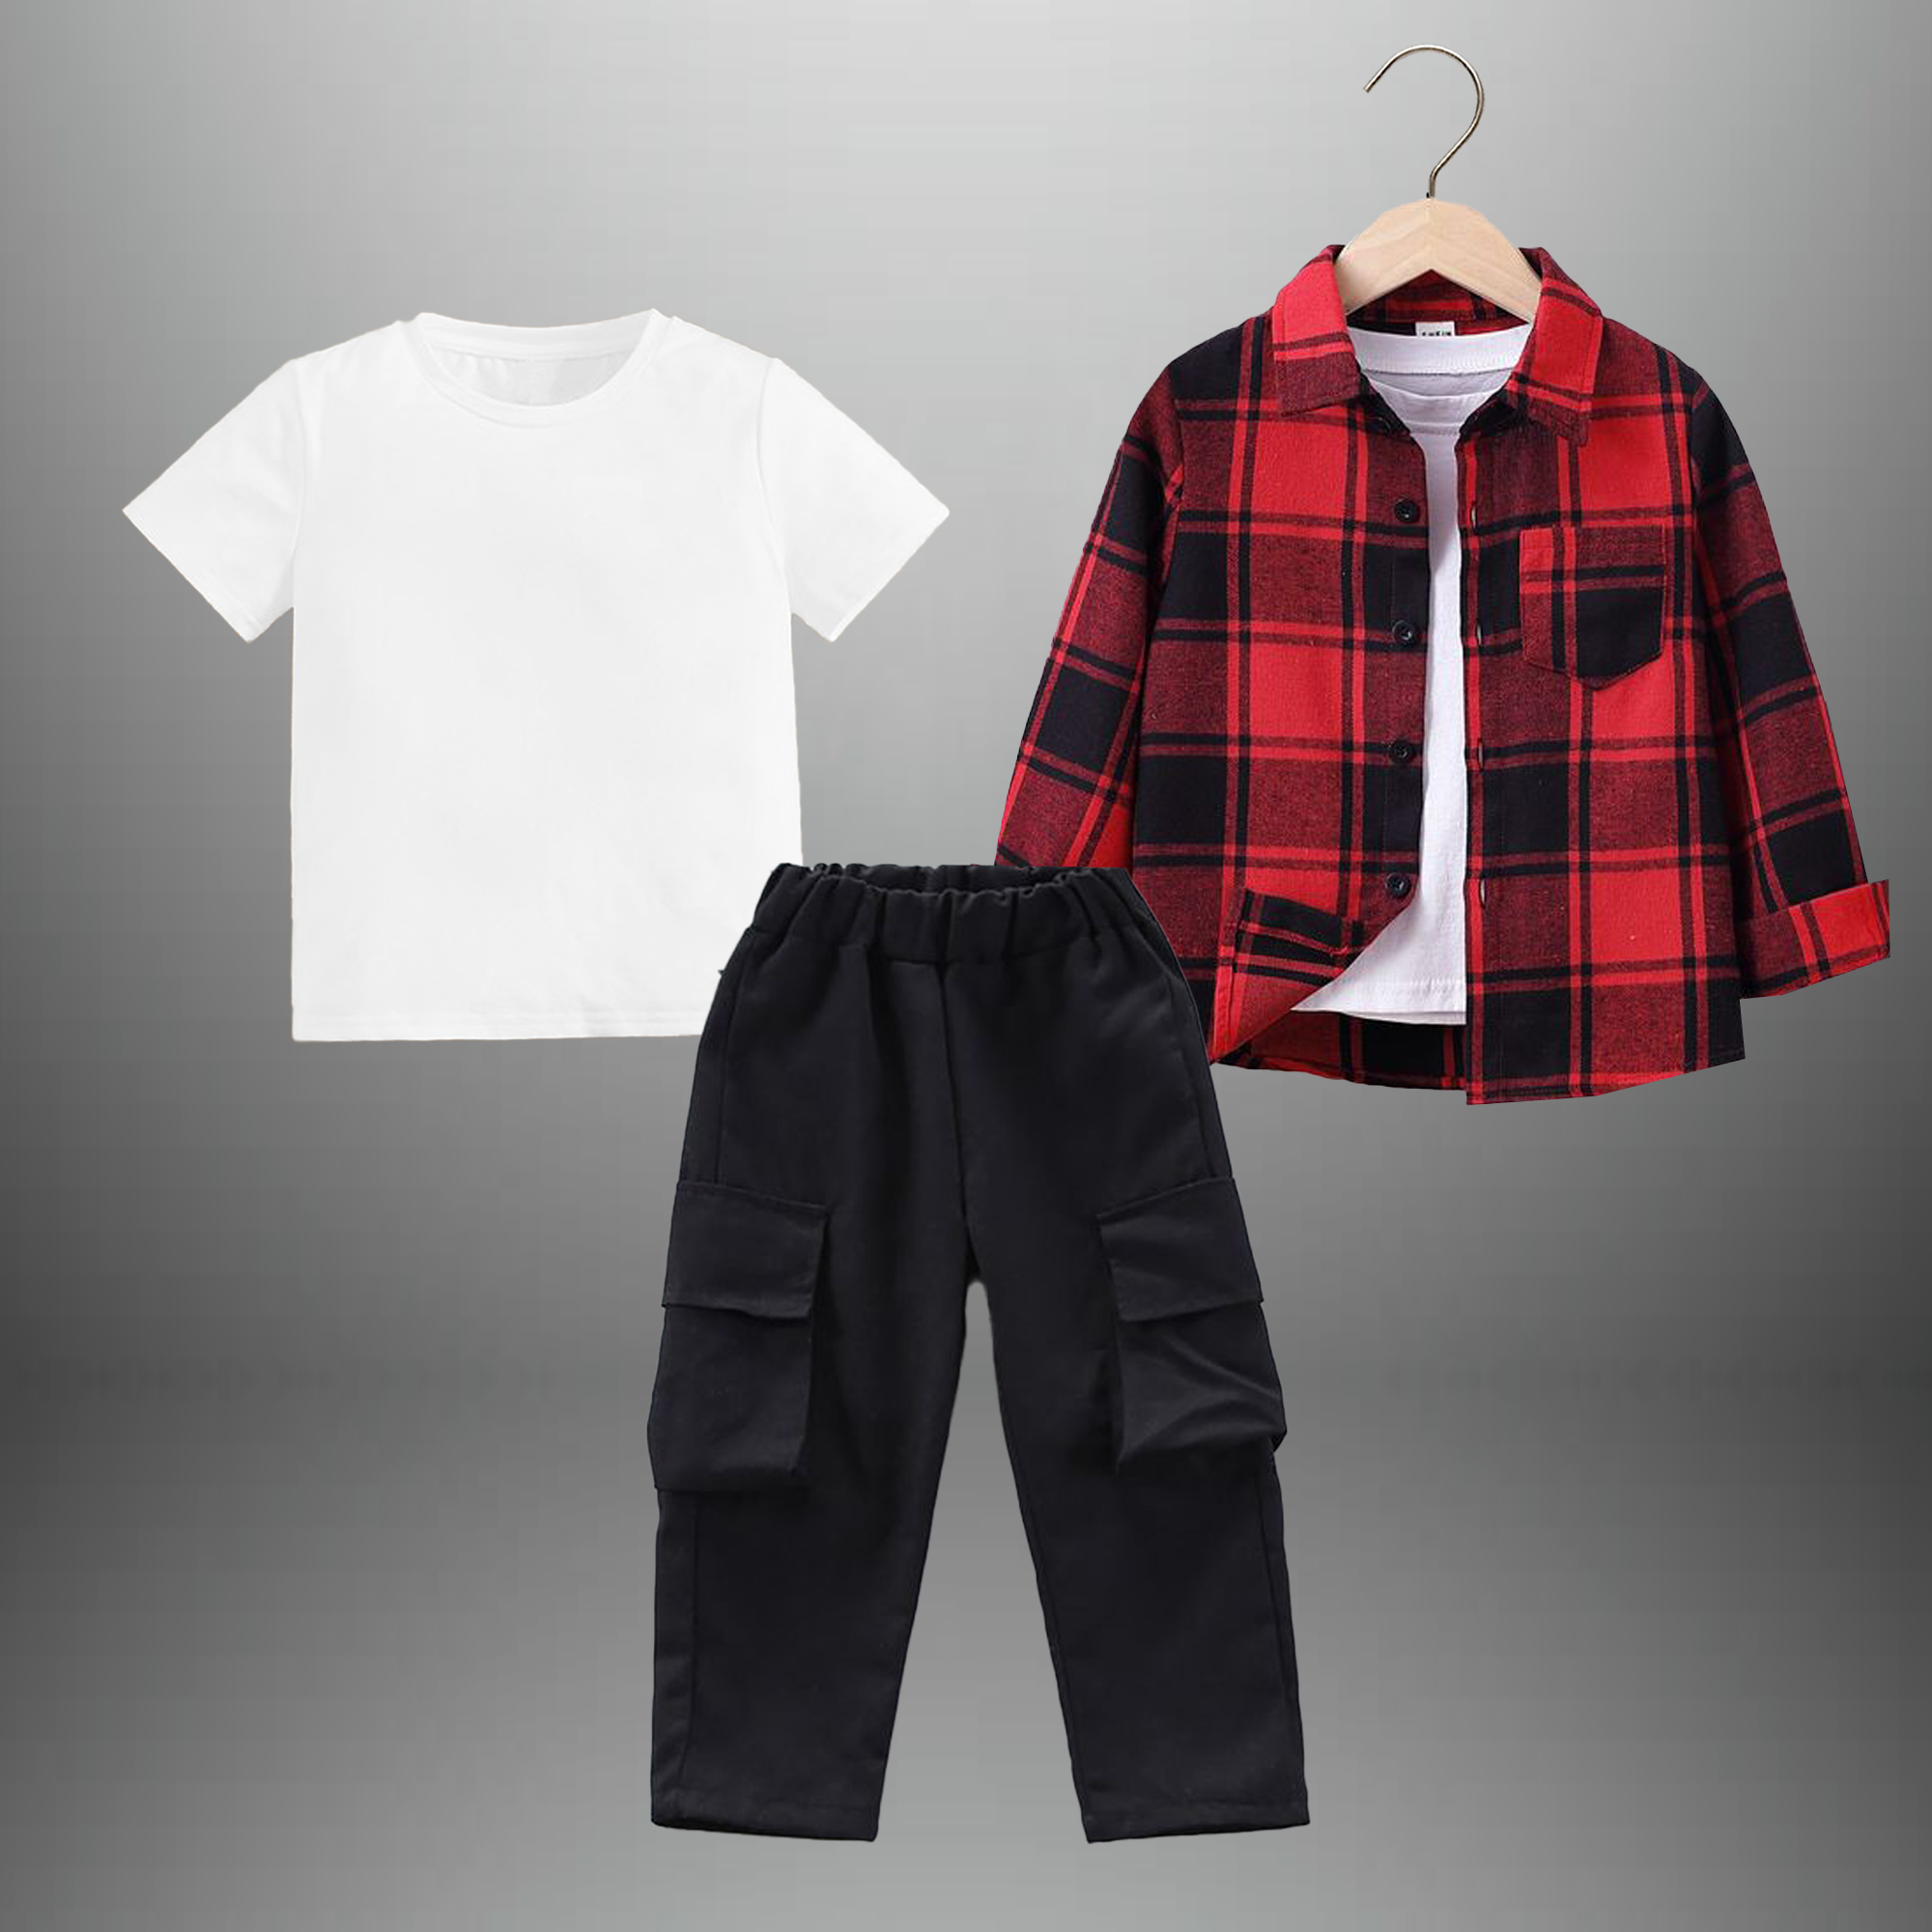 Boy's 3 piece set of Black Cargo pant, Red and Black Checkered shirt and a white T-shirt-RKFCW543